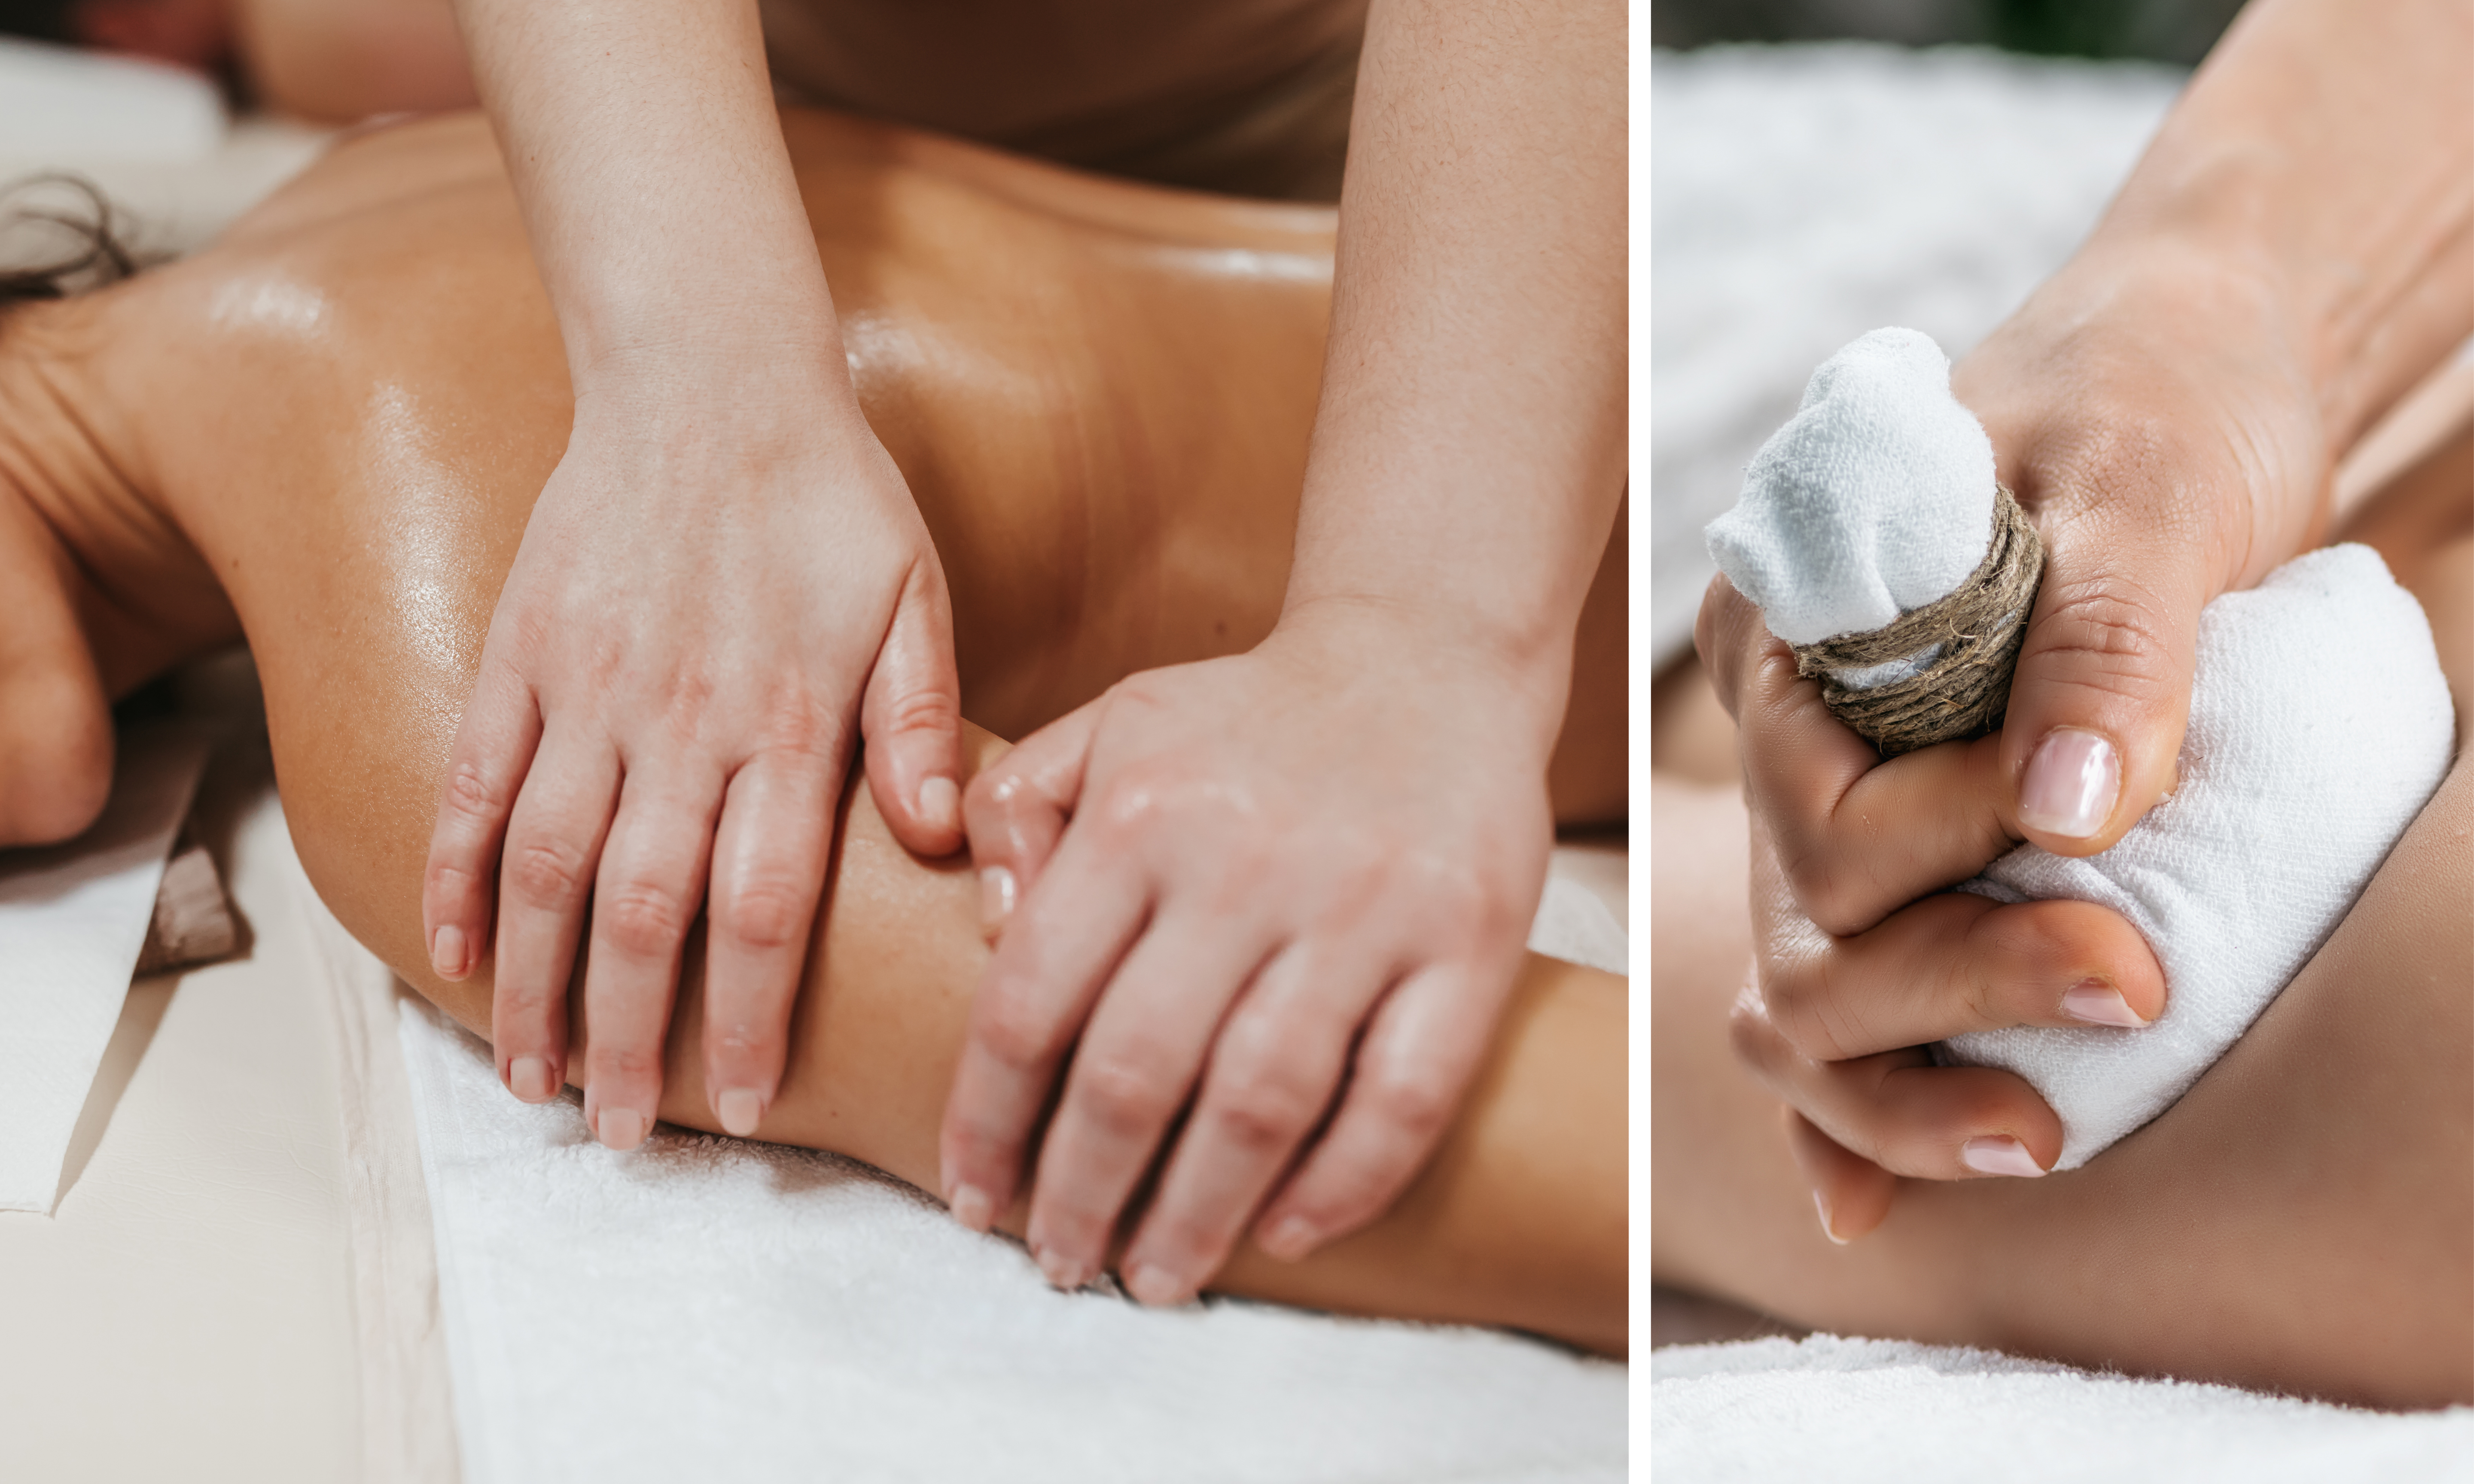 OIL MASSAGE WITH HOT COMPRESS (WHOLE BODY)